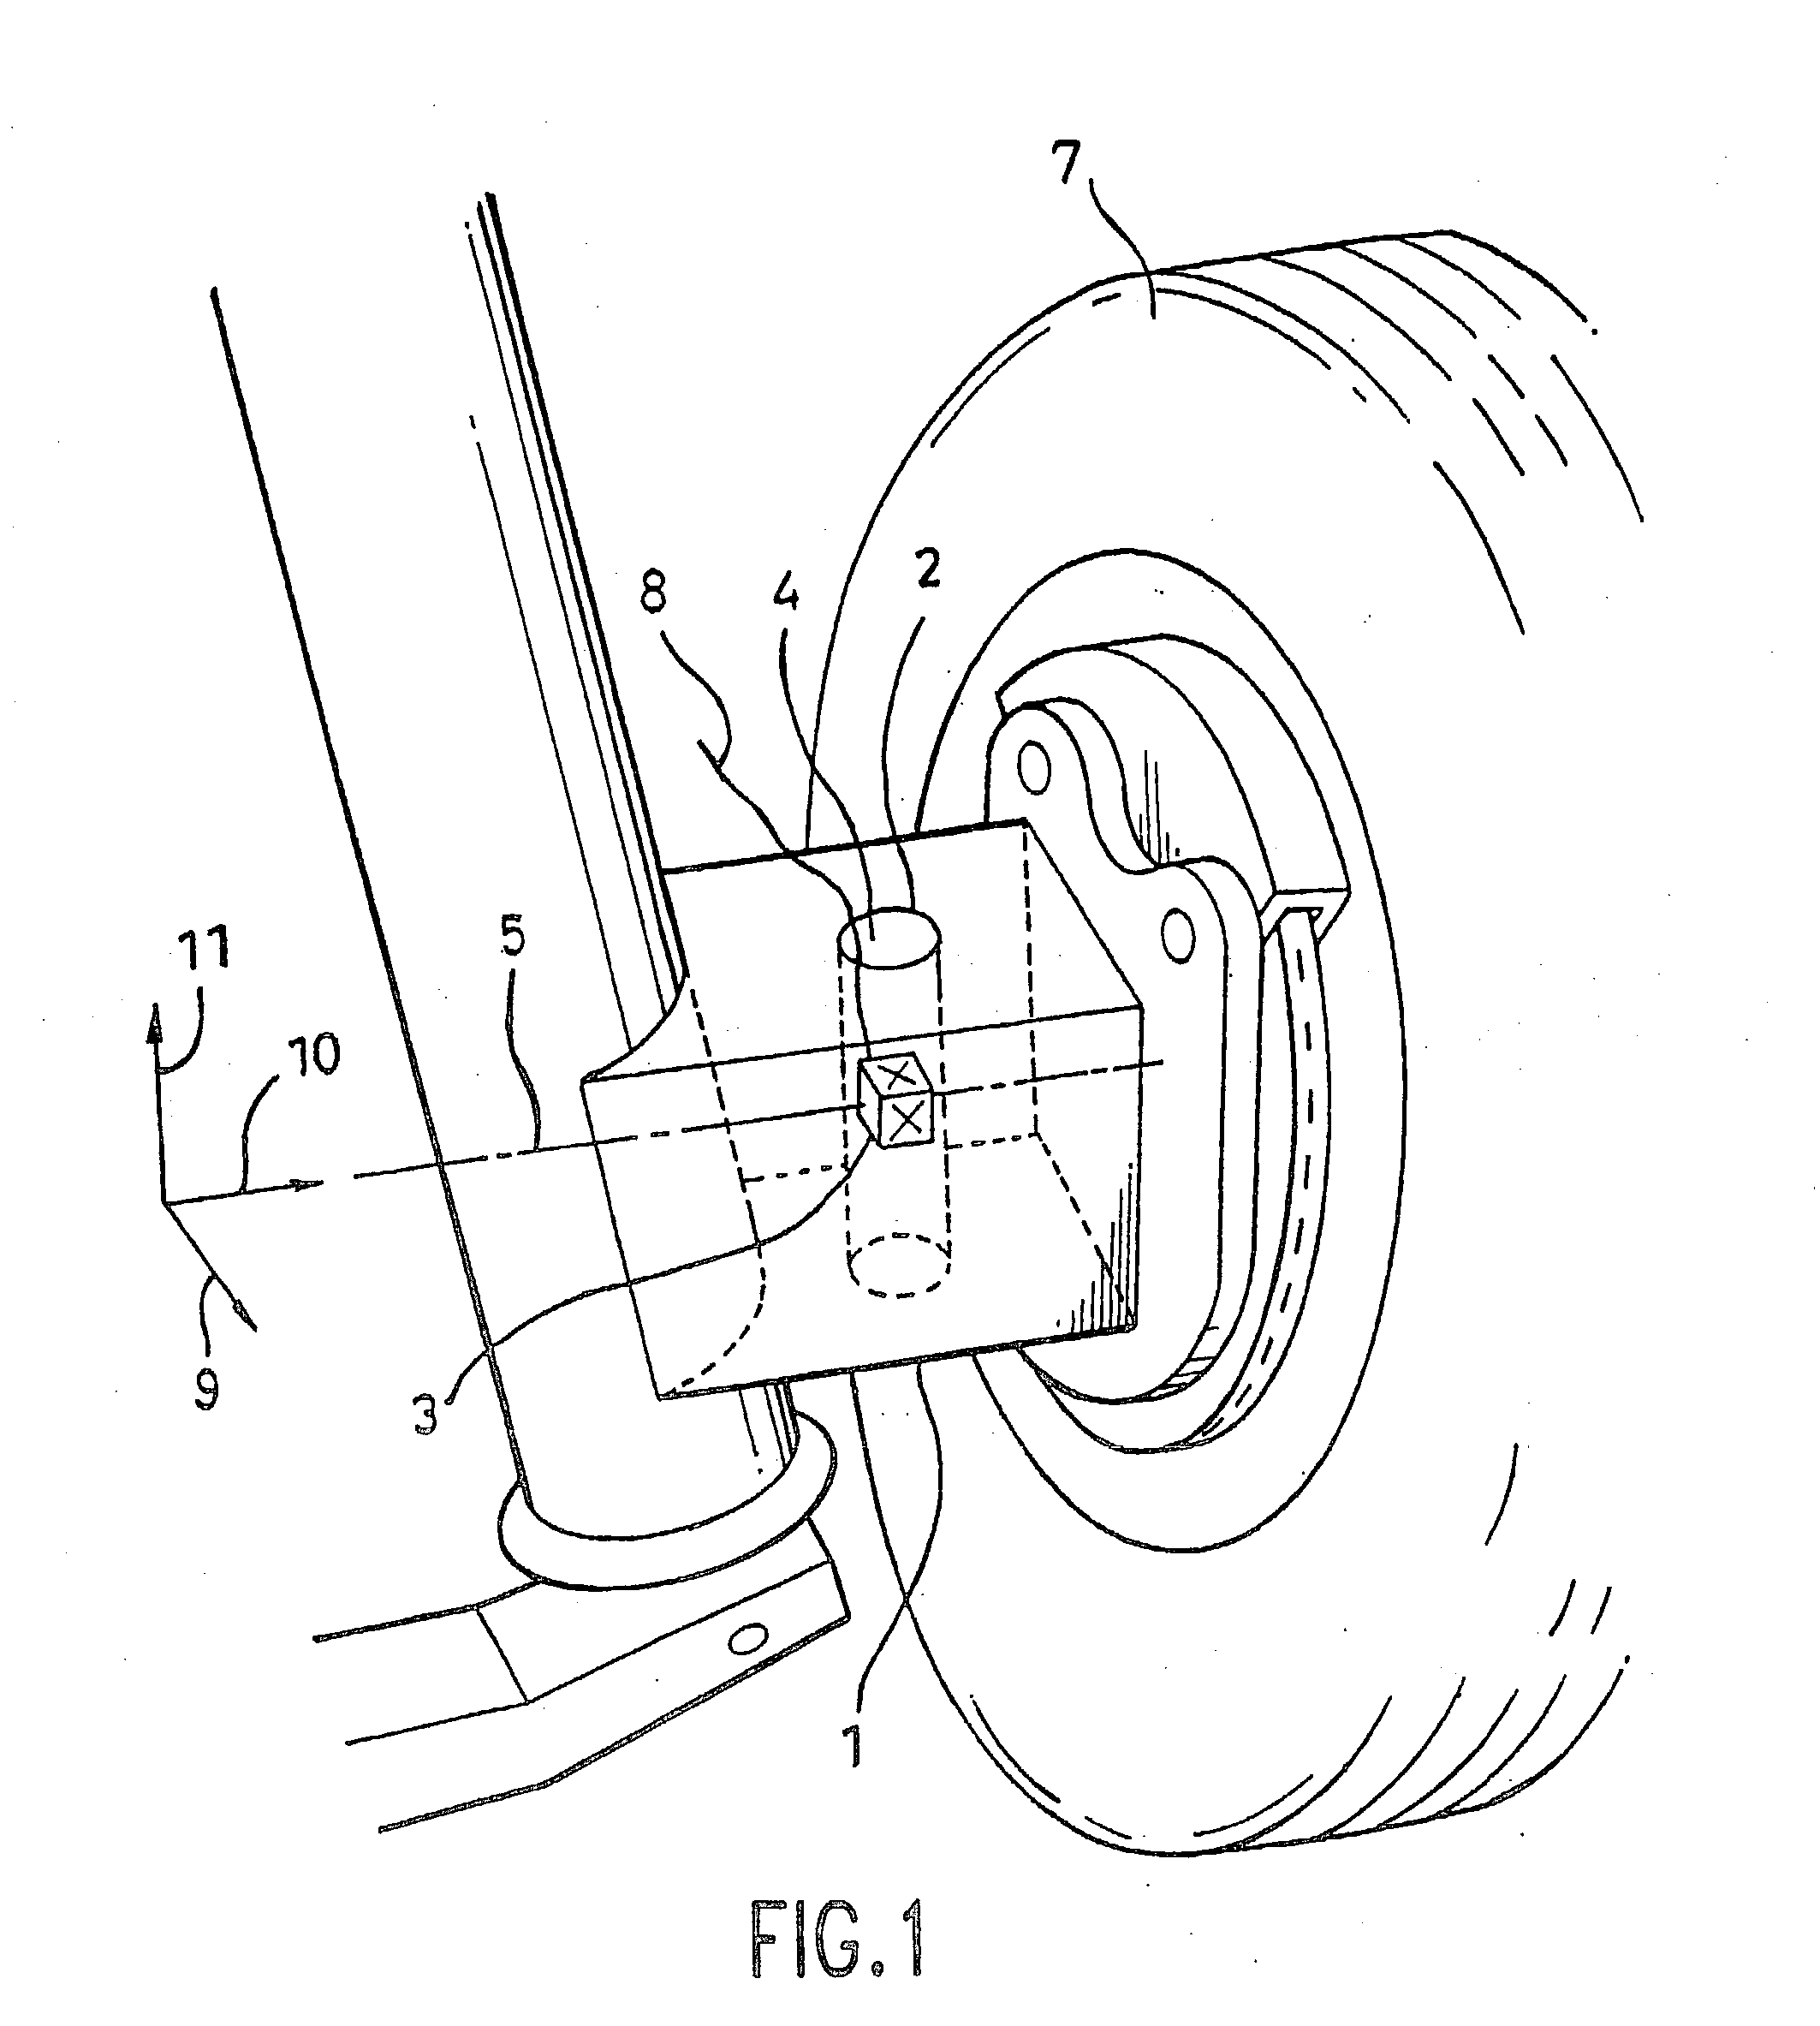 Wheel action force detector for detecting axle forces absent brake torque